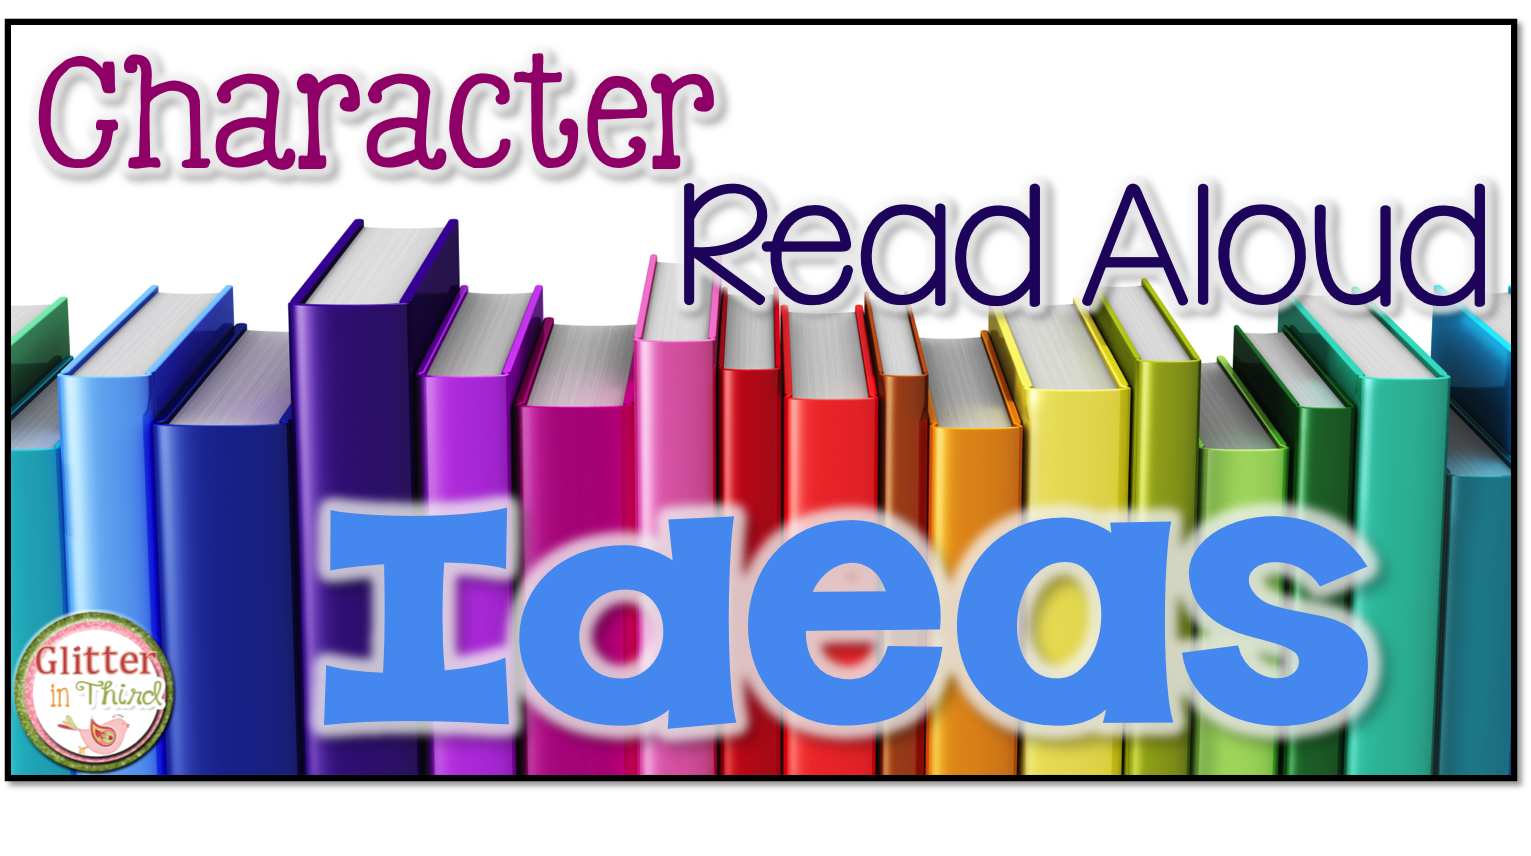 Building character in the classroom starts on day one. Check this post out for teaching ideas and resources you can use all year long.